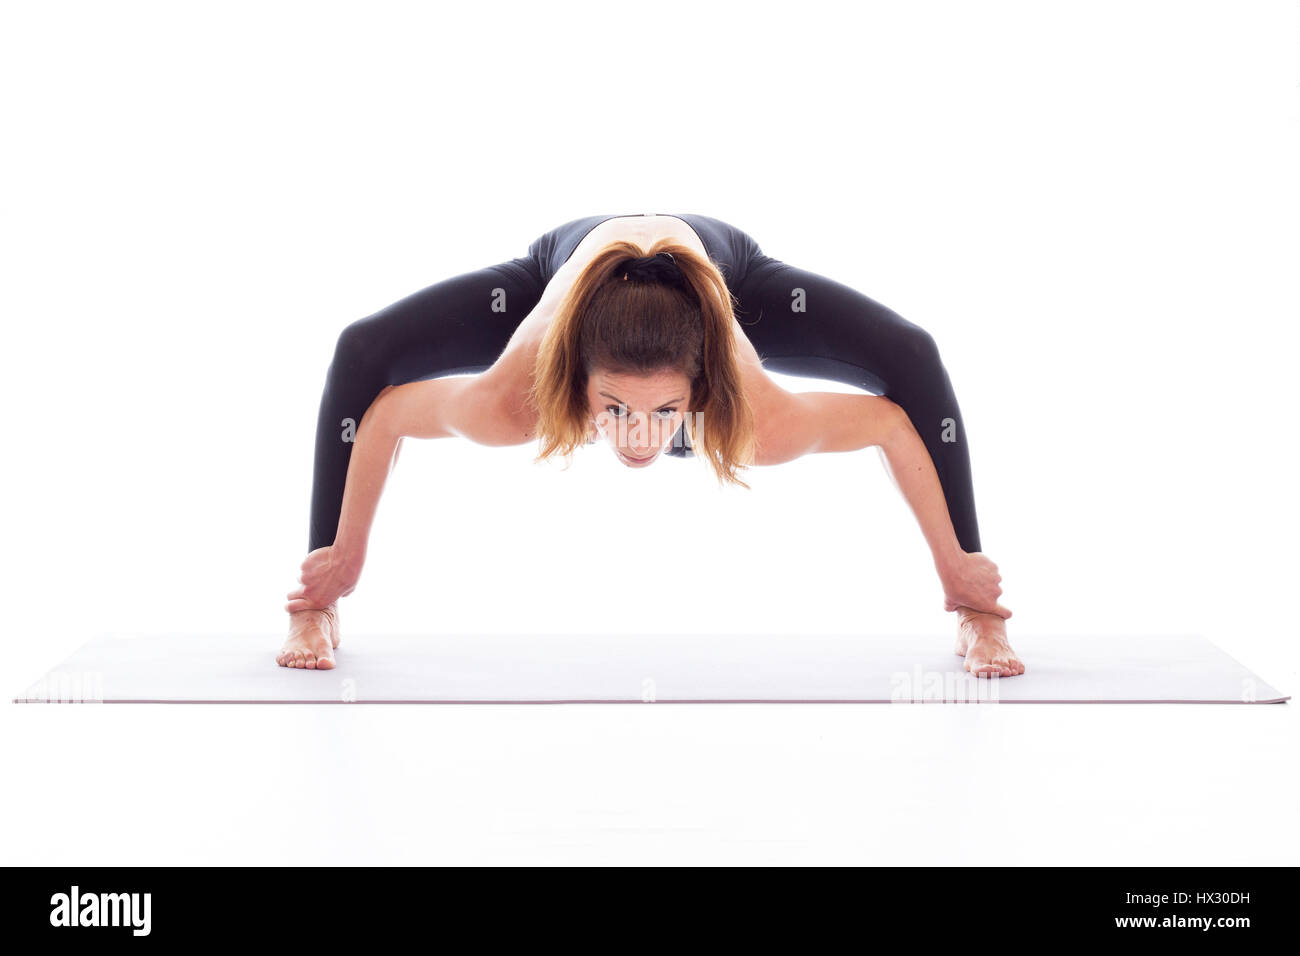 Studio shot of a young fit woman doing yoga exercises white background, Stock Photo